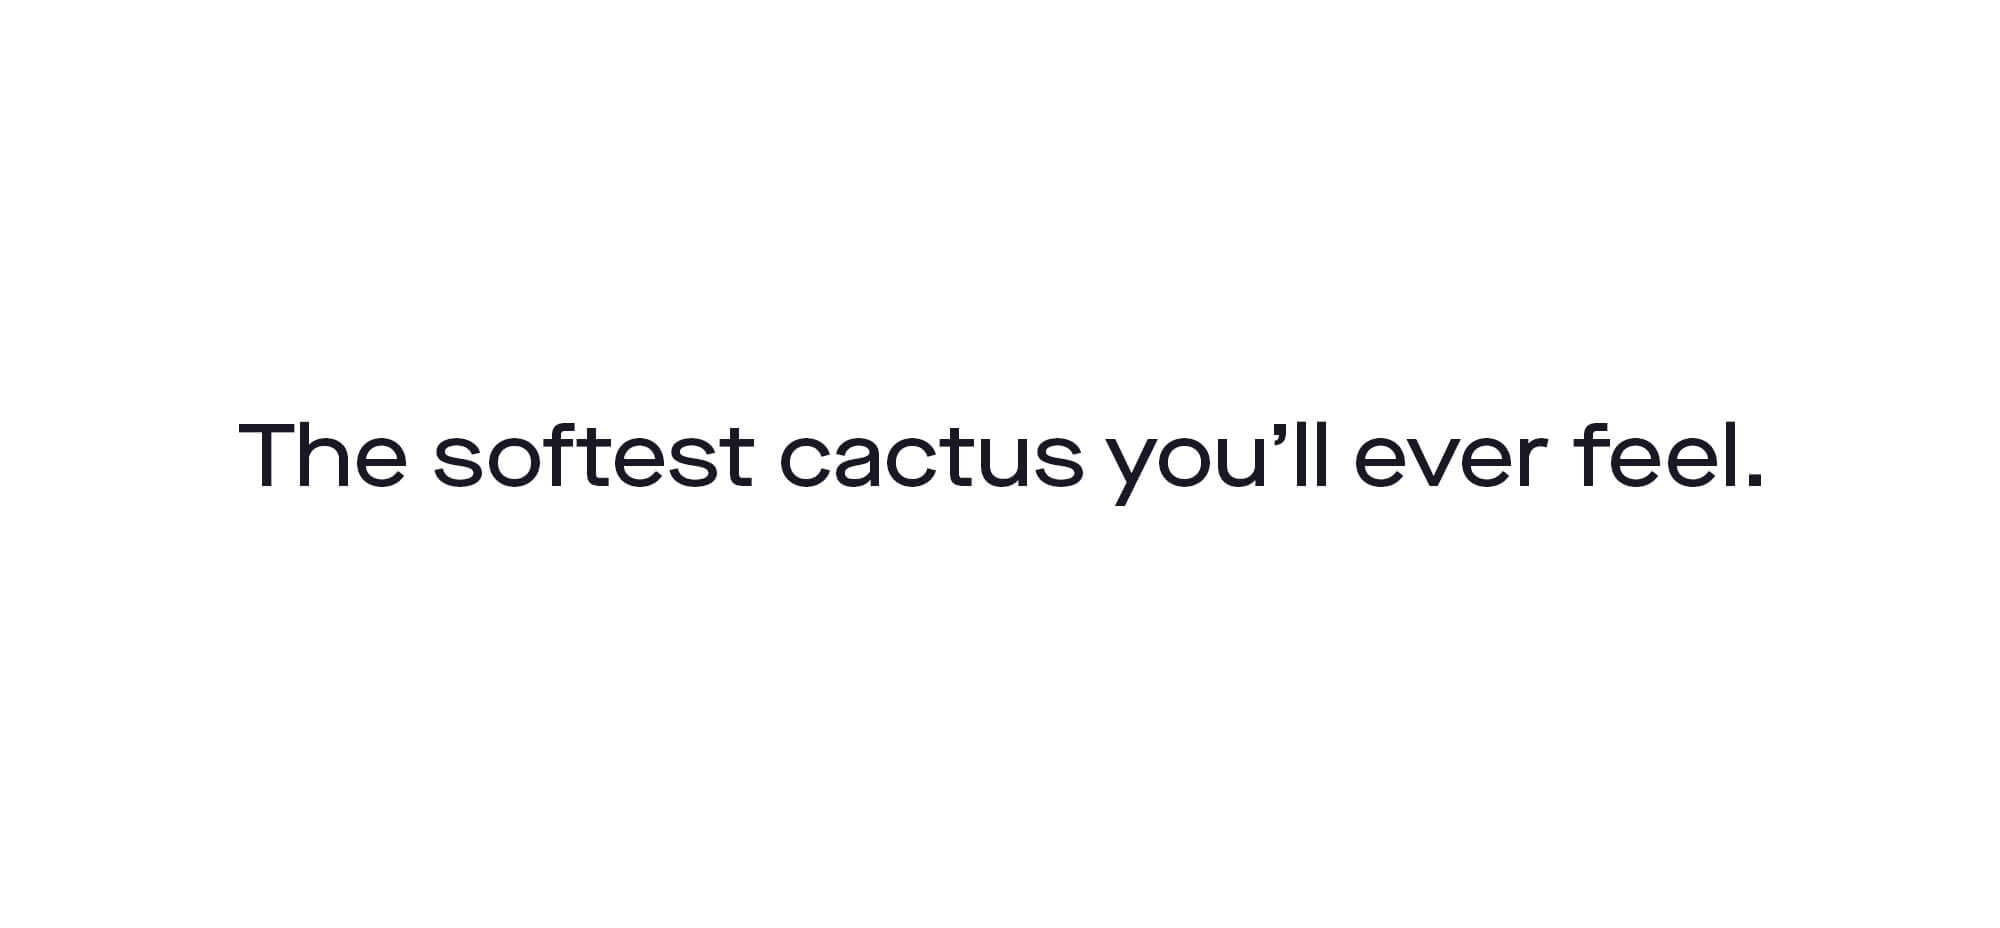 The softest cactus you'll ever feel